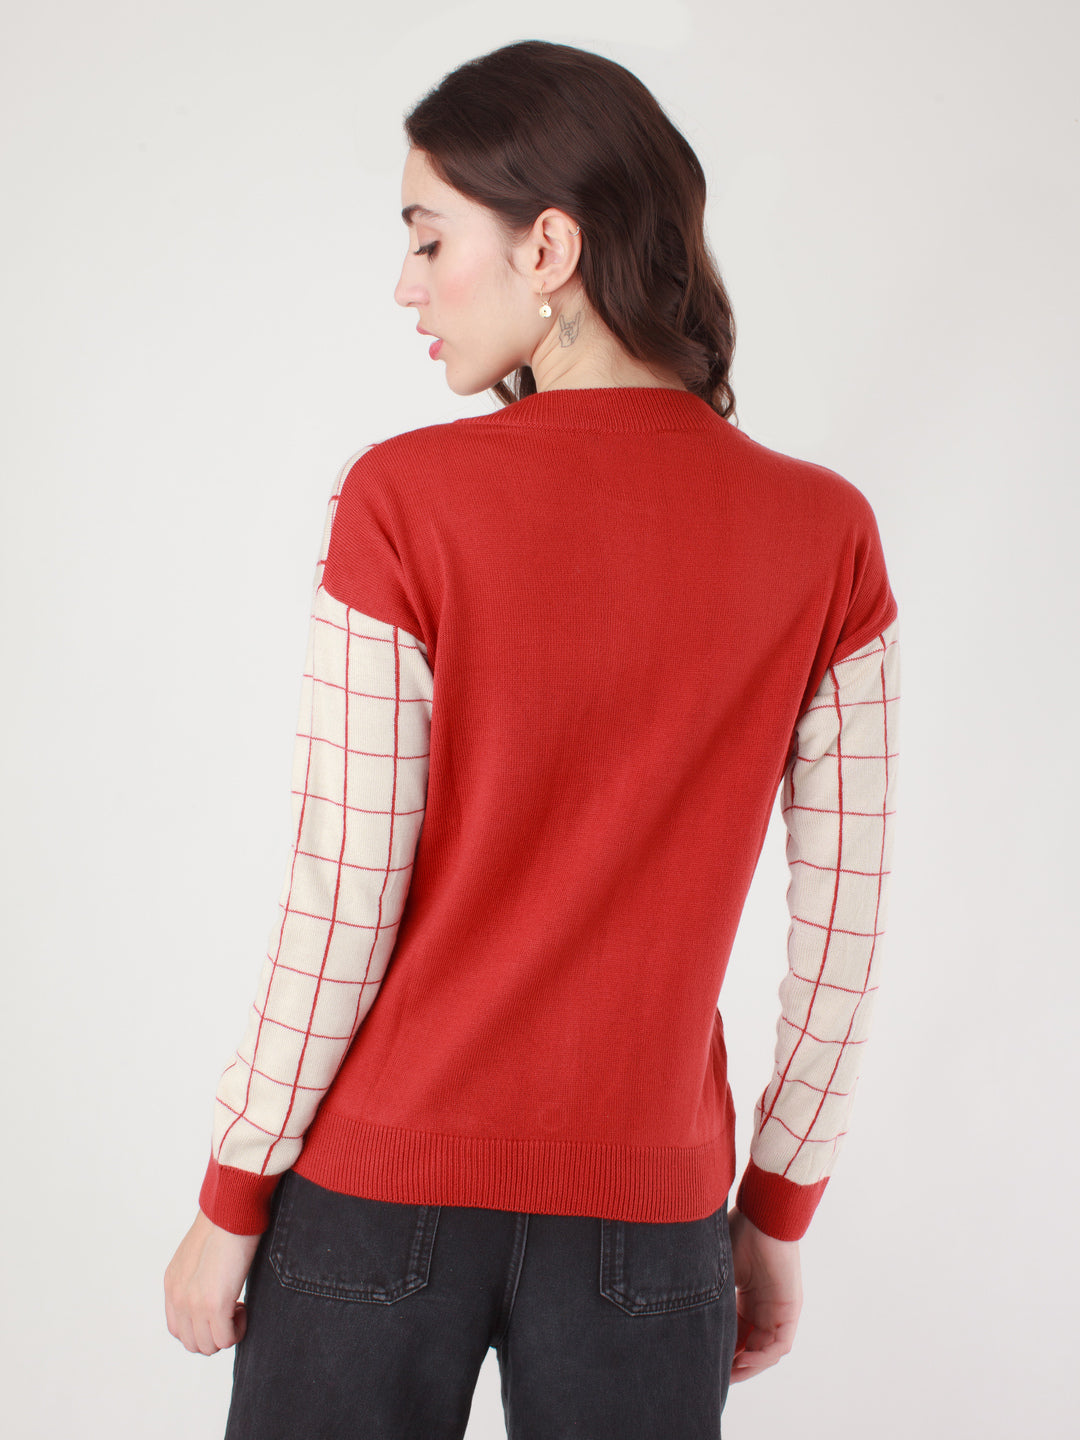 Multicolored Checked Buttoned Sweater For Women